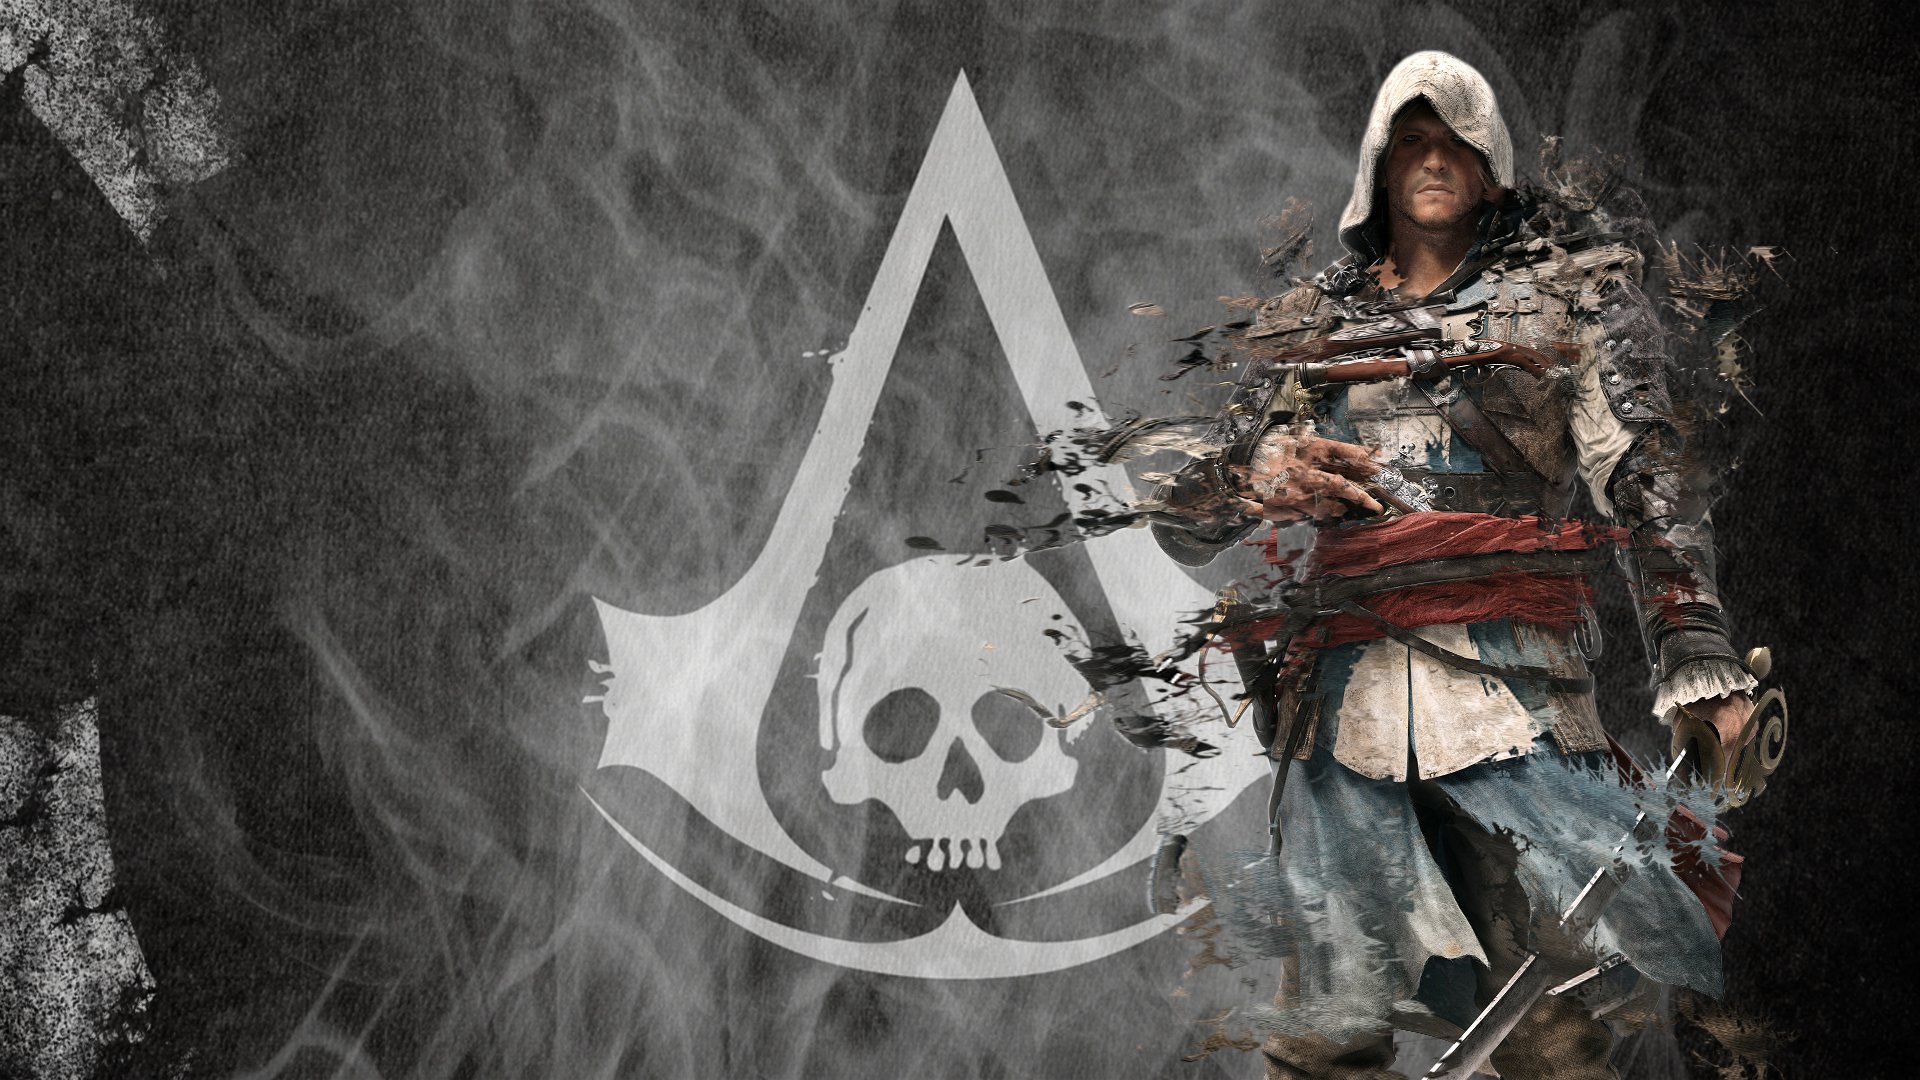 assassins, Creed, Black, Flag, Fantasy, Fighting, Action, Stealth, Adventure, Pirate, Poster Wallpaper